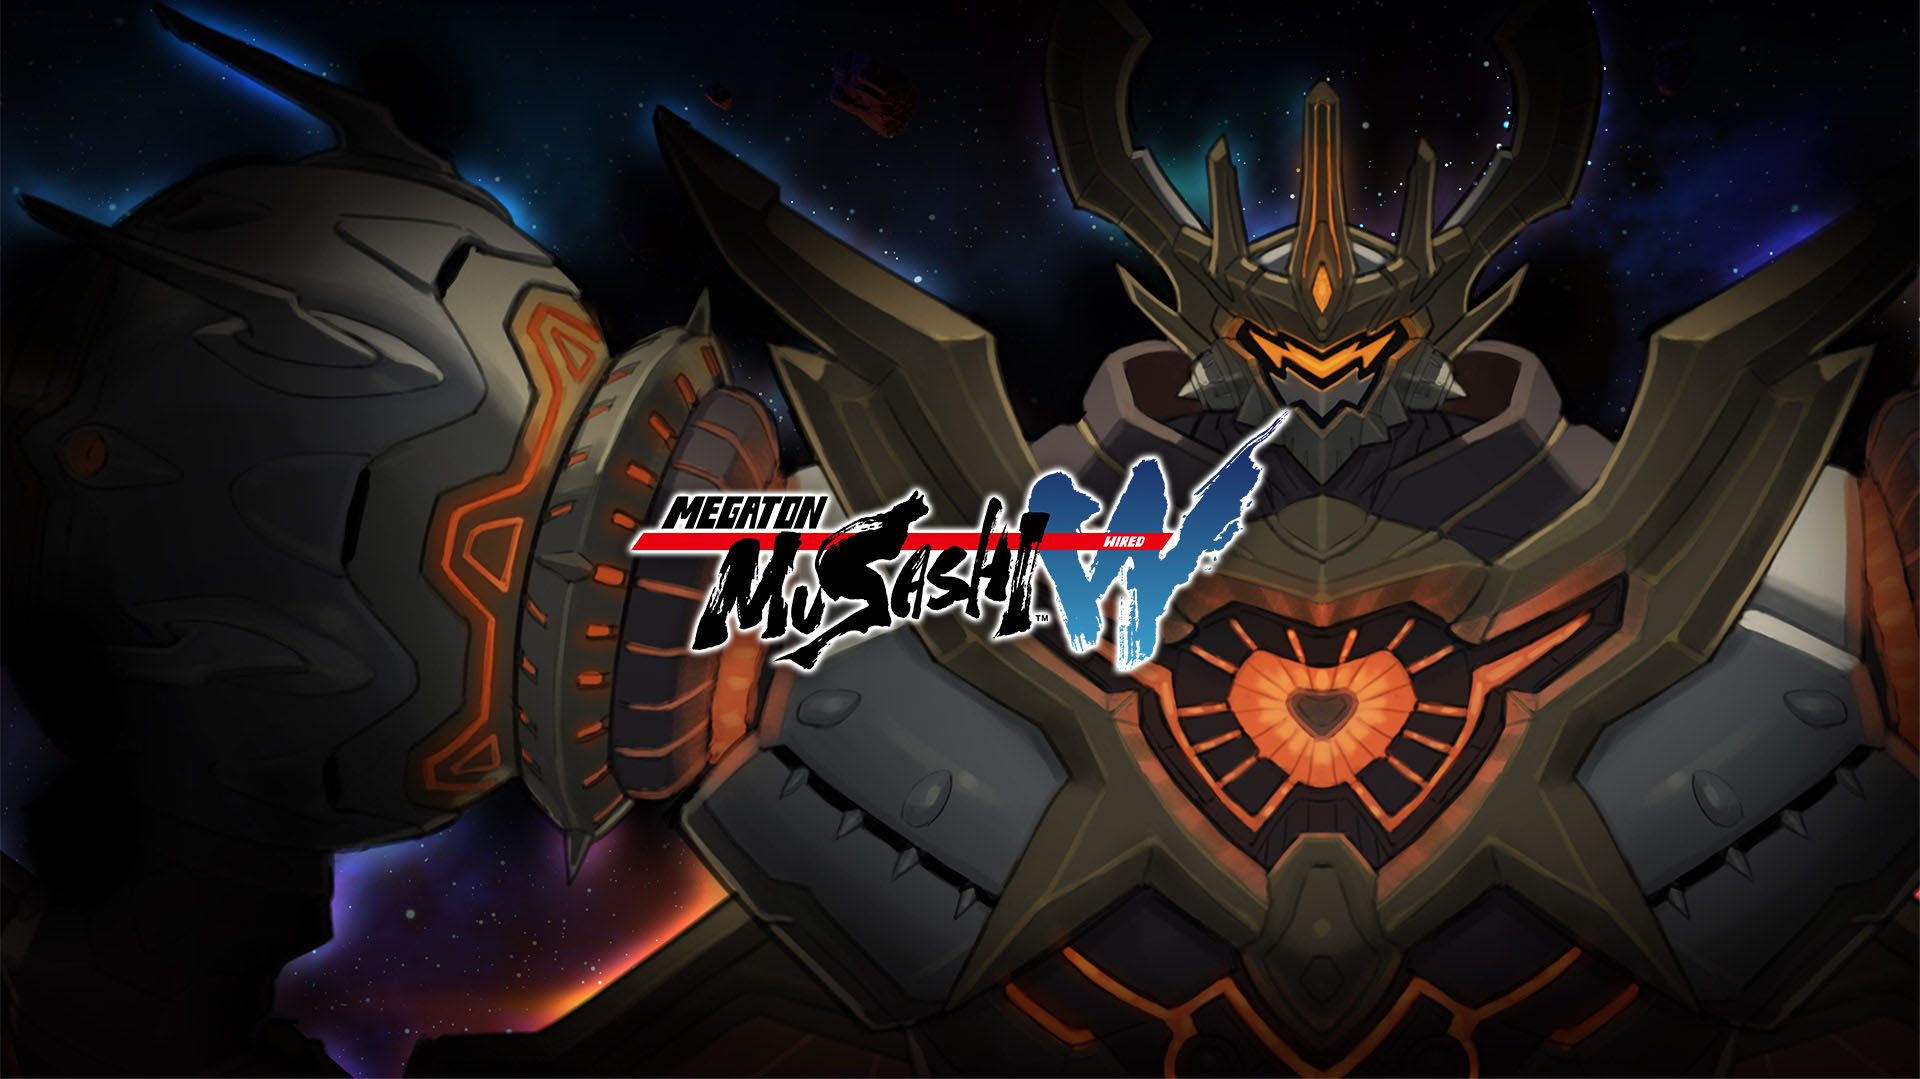 Megaton Musashi: Wired announced